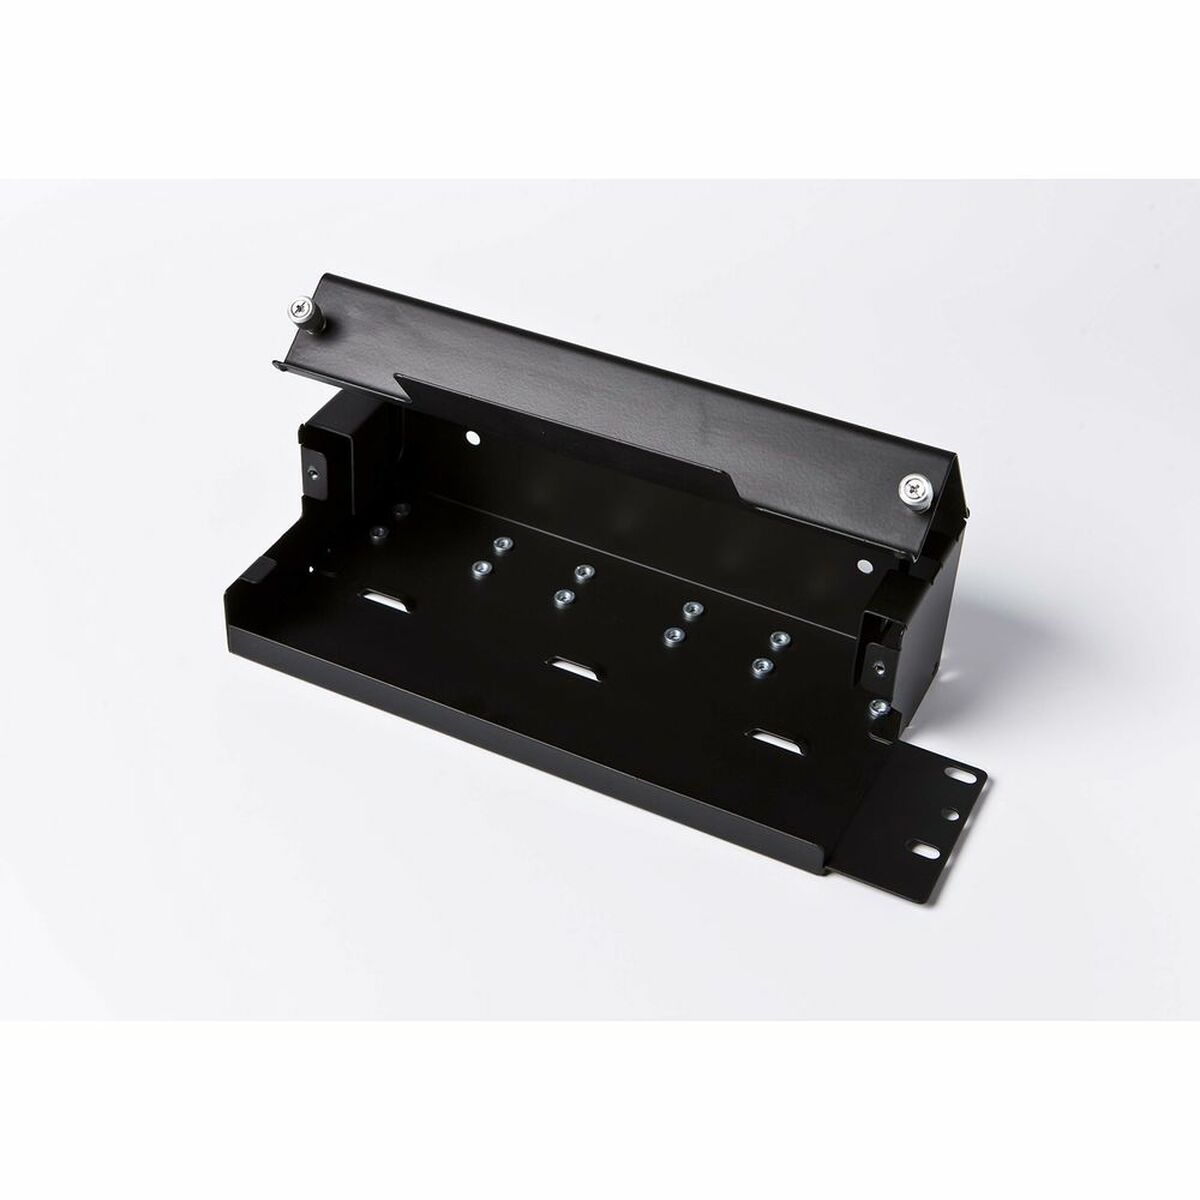 Printer Input Tray Brother PACM500, Brother, Computing, Printers and accessories, printer-input-tray-brother-pacm500, Brand_Brother, category-reference-2609, category-reference-2642, category-reference-2645, category-reference-t-19685, category-reference-t-19911, category-reference-t-21377, category-reference-t-25677, Condition_NEW, Price_100 - 200, Teleworking, RiotNook